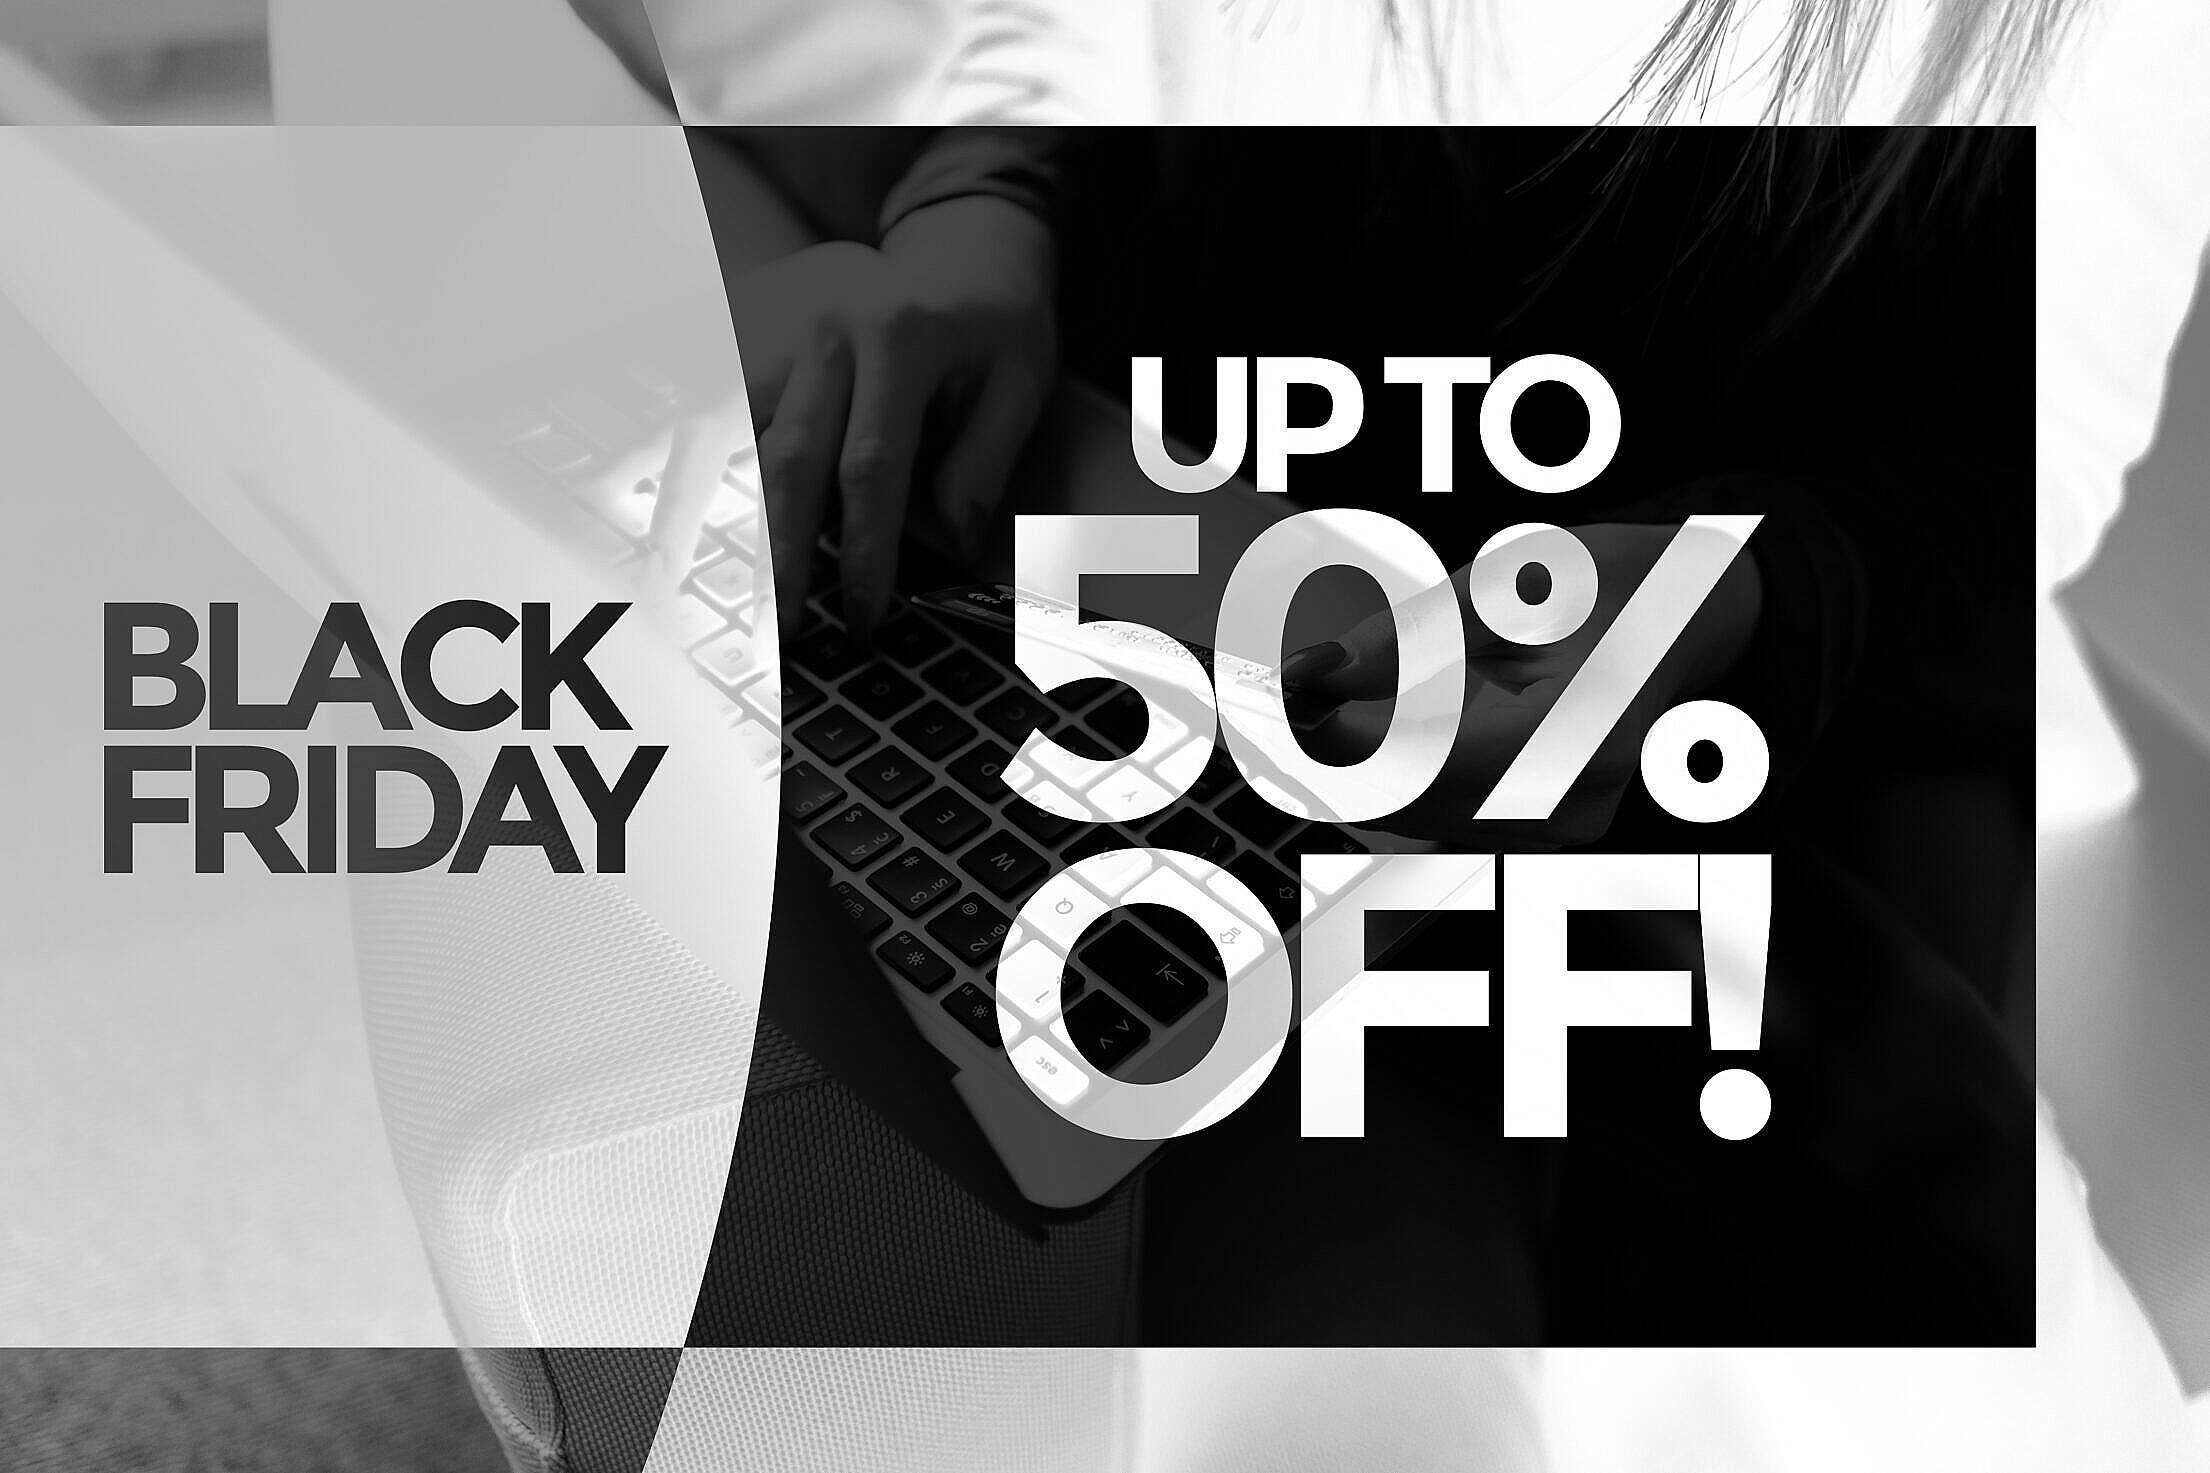 Black Friday Up to 50% off 9x16 